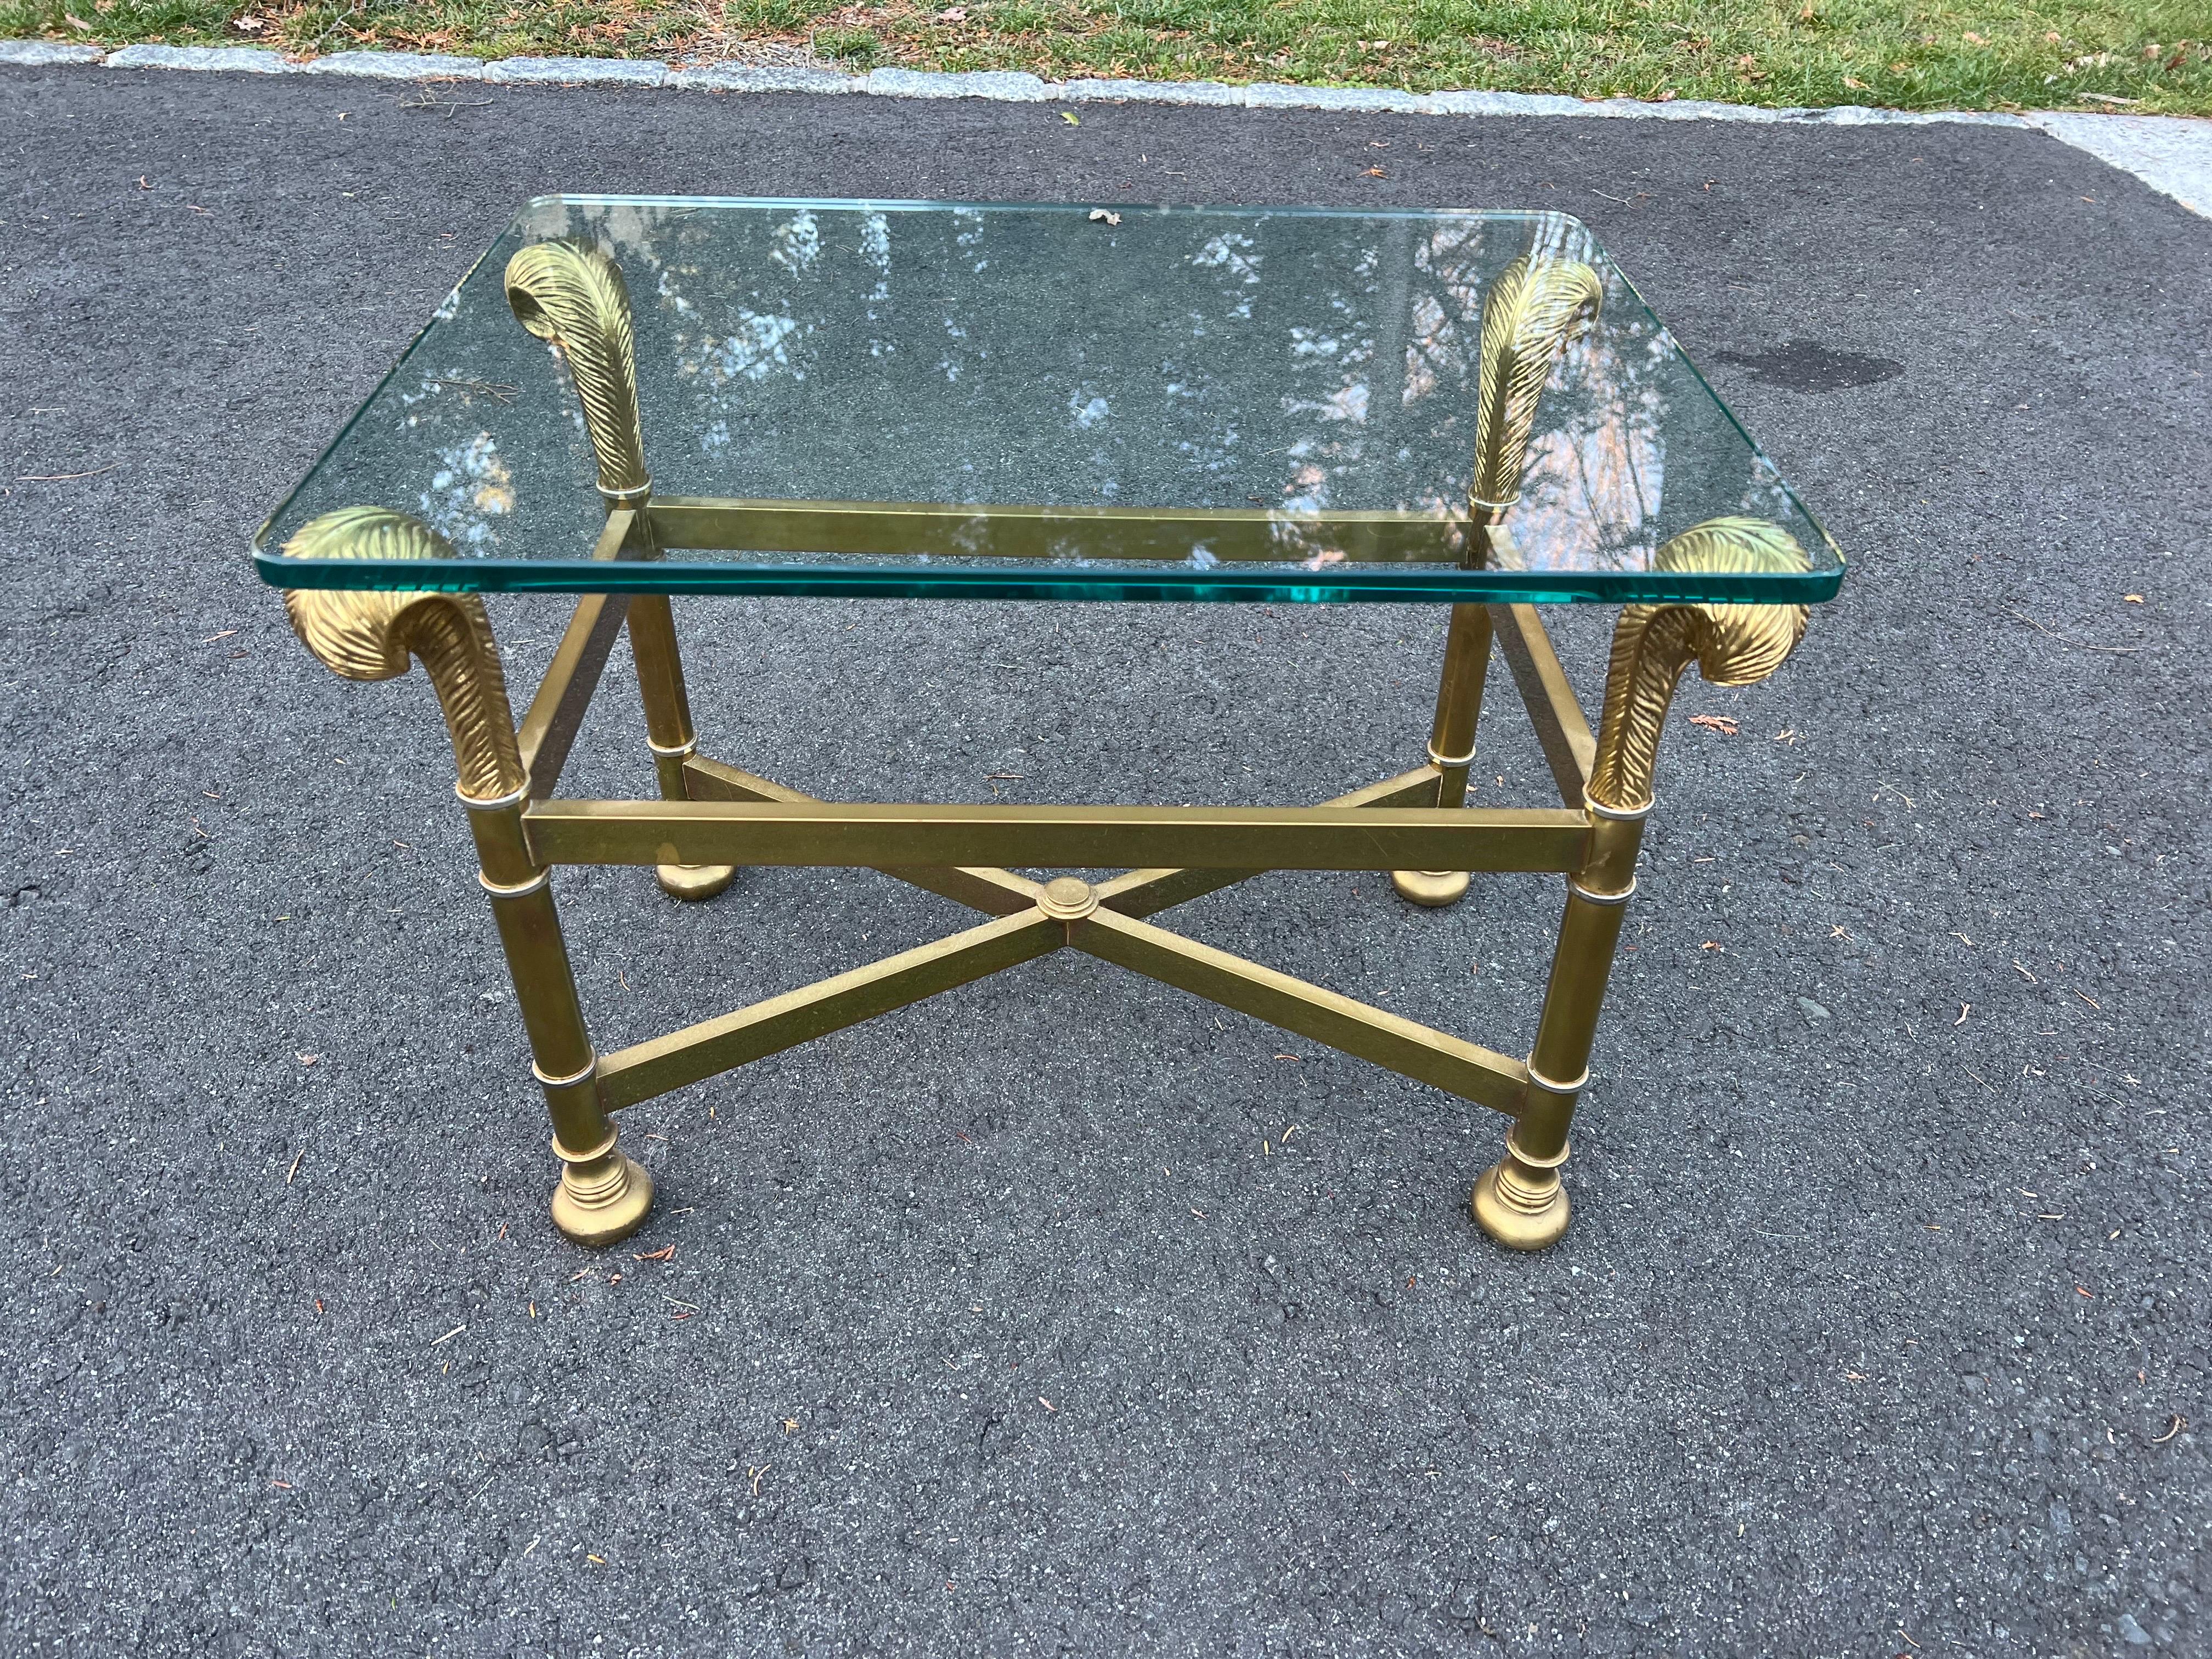 Hollywood Regency small low side table. This is a very elegant side table. It is very low and could also be turned into a cool ottoman or bed for a tiny dog. Very unique piece. The glass top piece is loose and not attached to the base.